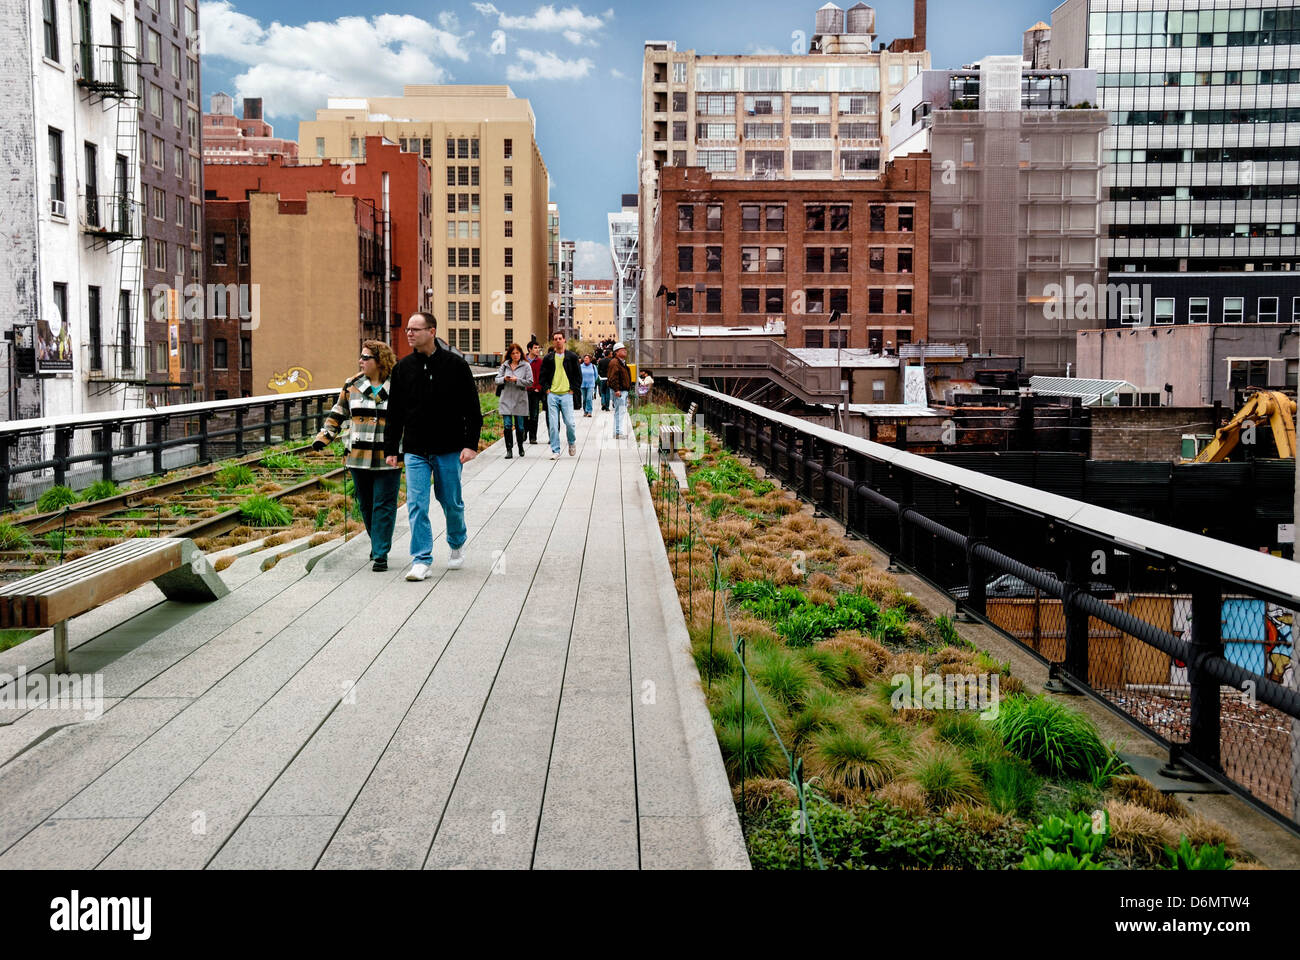 The High Line is a 1-mile New York City linear park built on an elevated former railroad, and is now an aerial greenway. Stock Photo